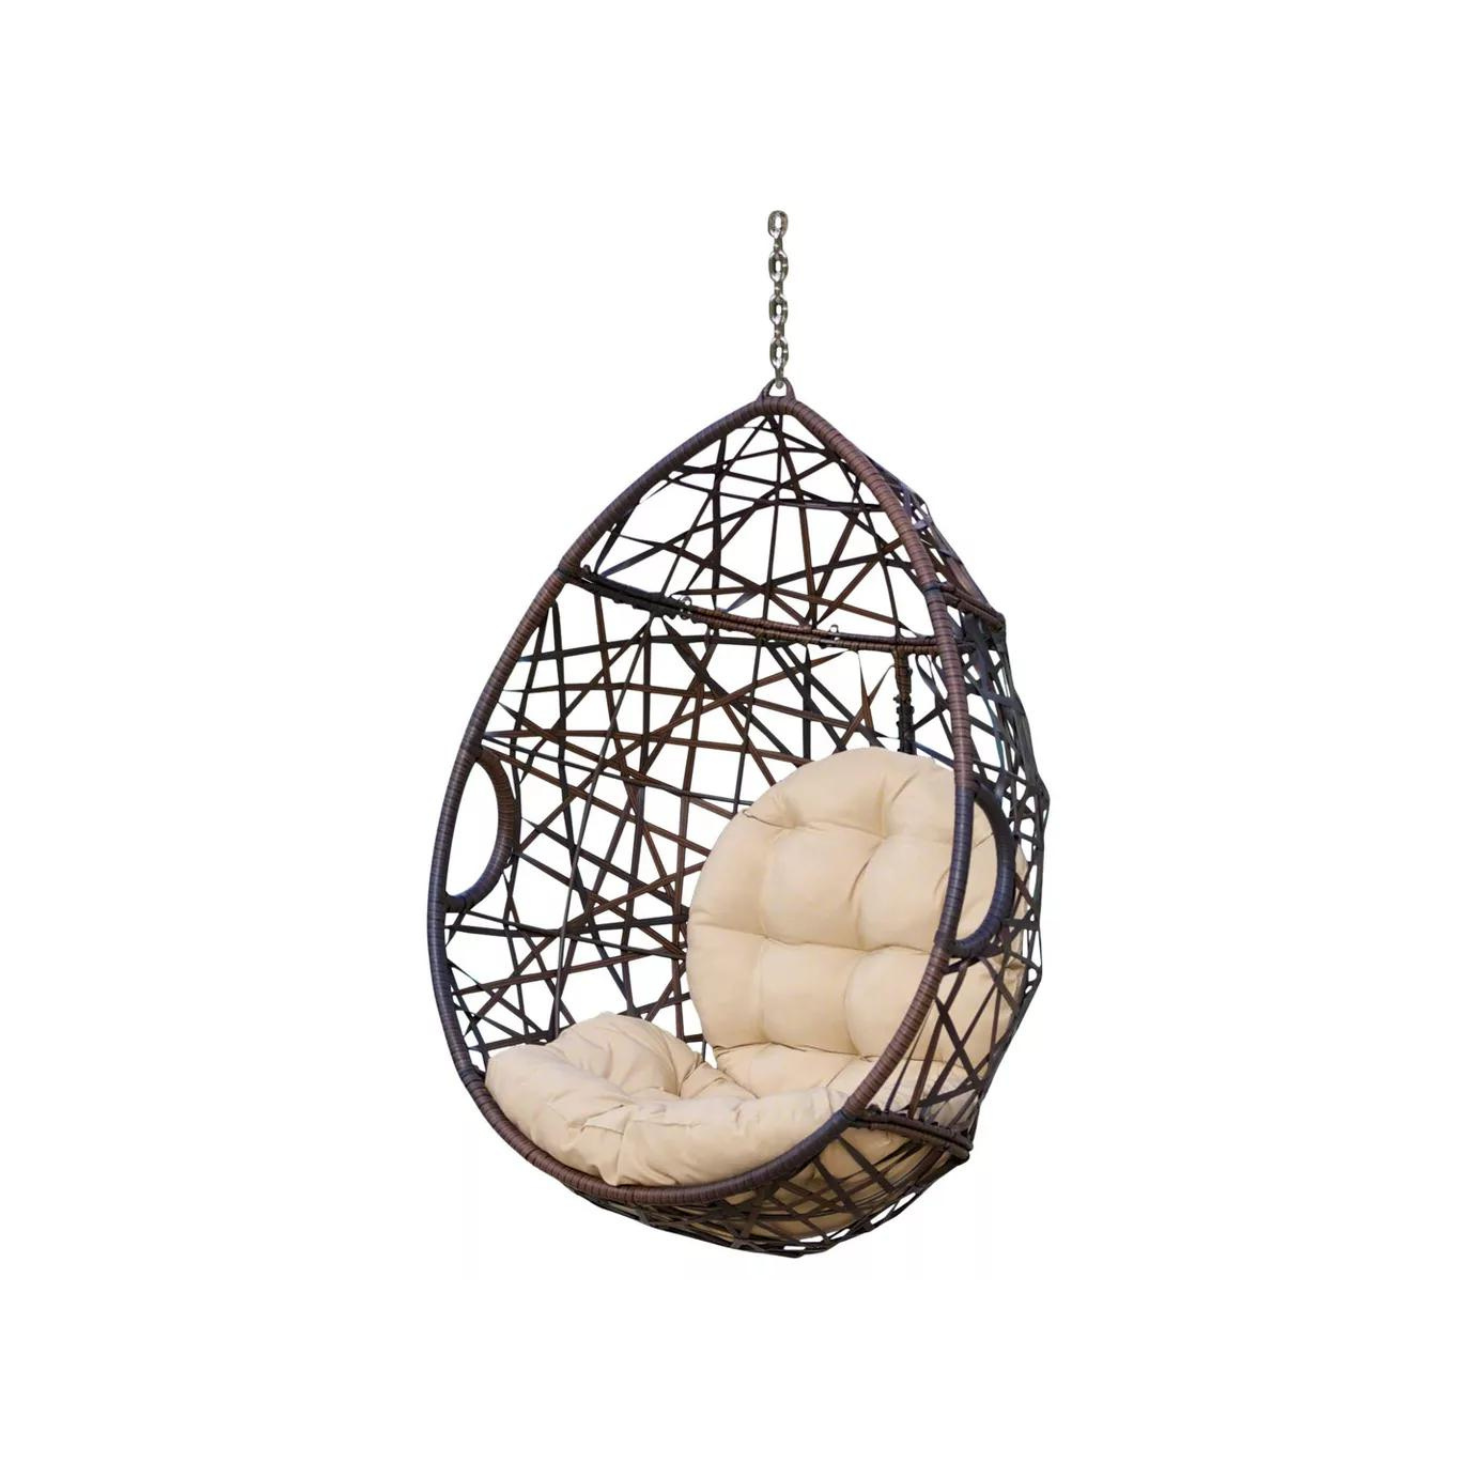 Christopher Knight Home Cayuse Wicker Tear Drop Hanging Chair